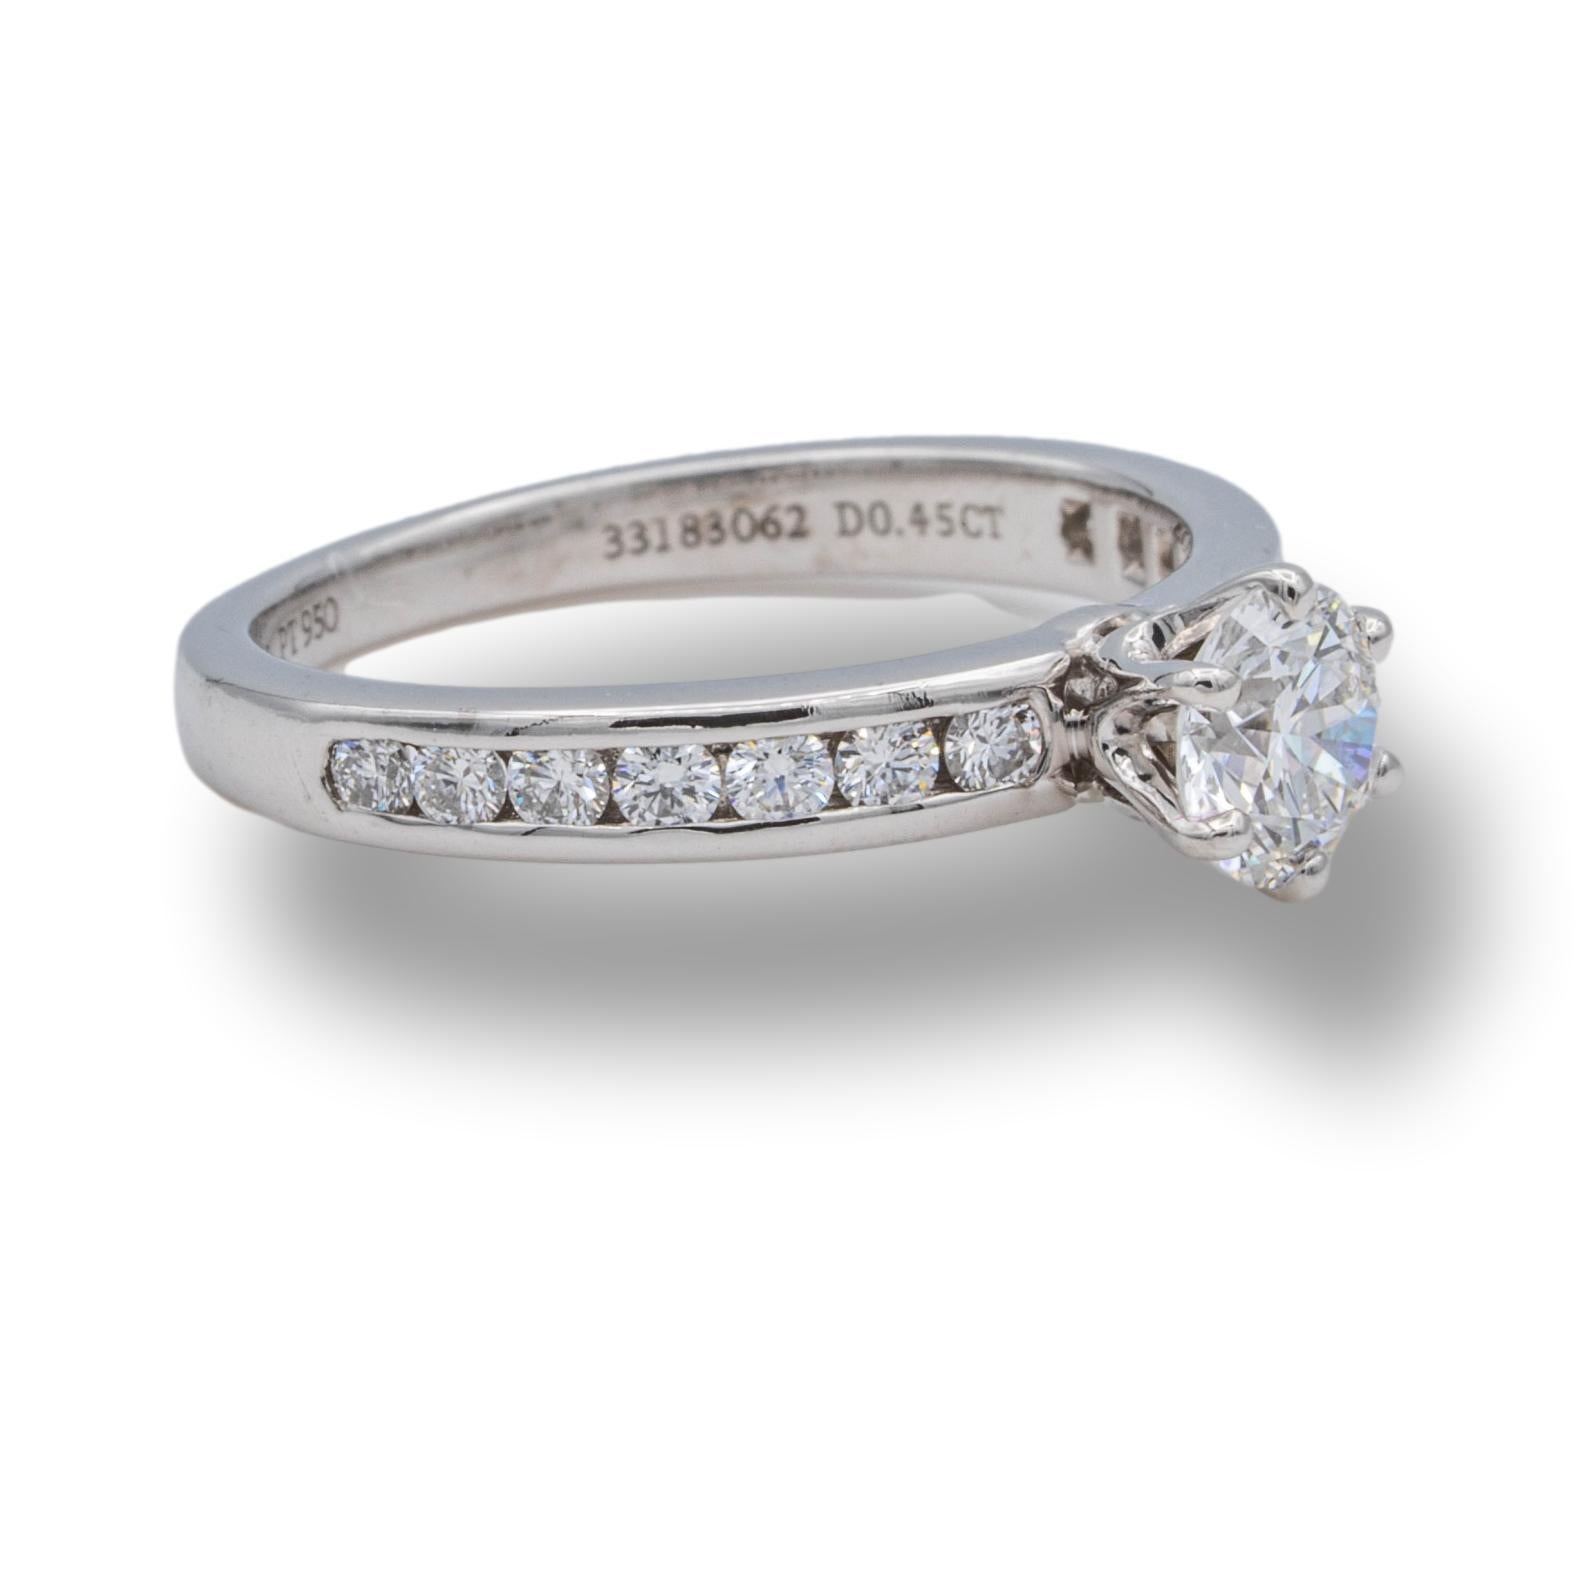 Tiffany & Co. Diamond Engagement ring with channel set diamond band featuring a 0.45 ct center F VS2 finely crafted in 18 platinum. Center diamond is flanked by 7 channel set round brilliant cut diamonds on each side for a total of 14 diamonds